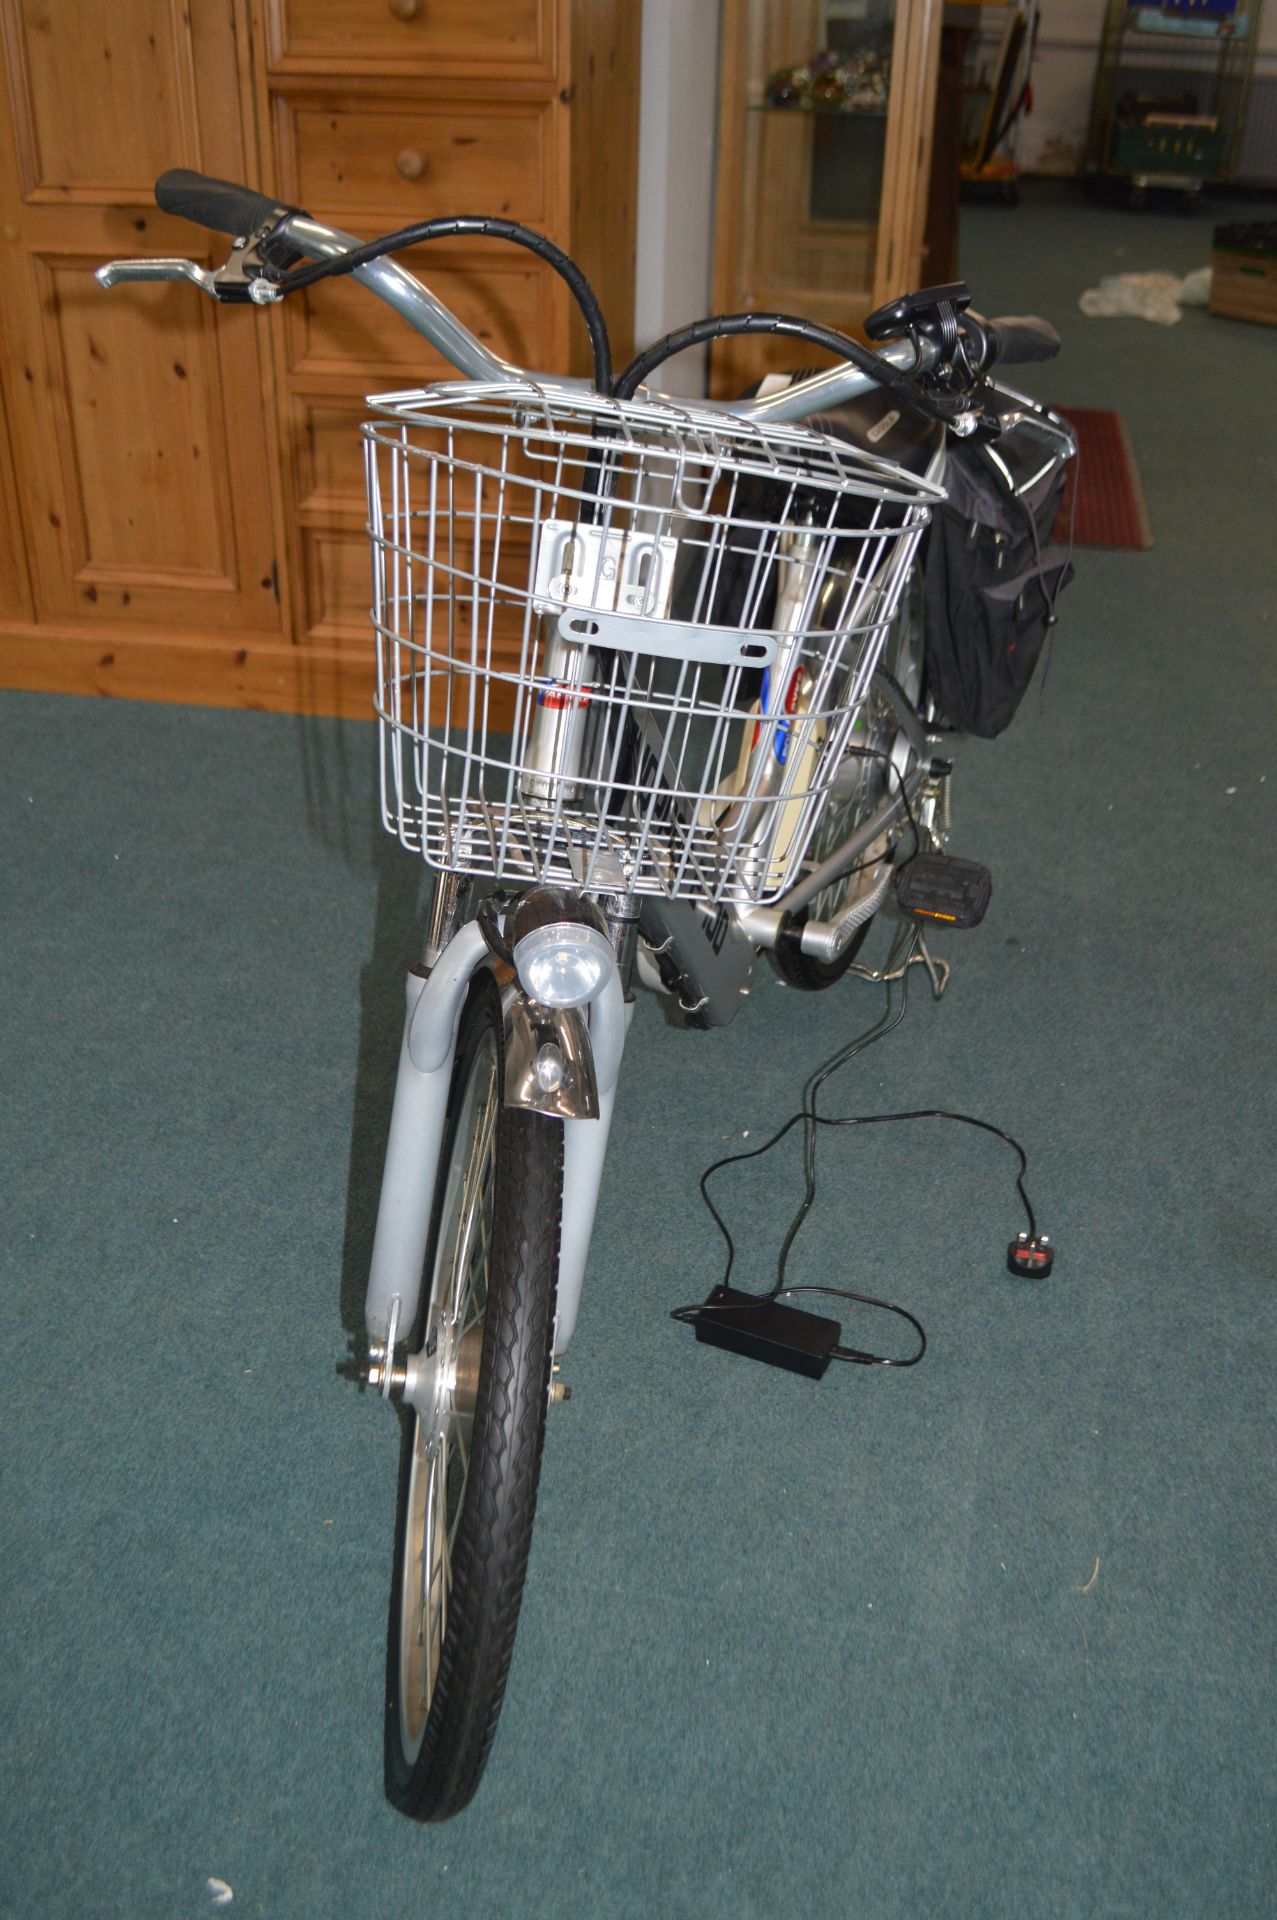 Powabyke Shopper E100 Electric Bicycle with Charge - Image 2 of 2